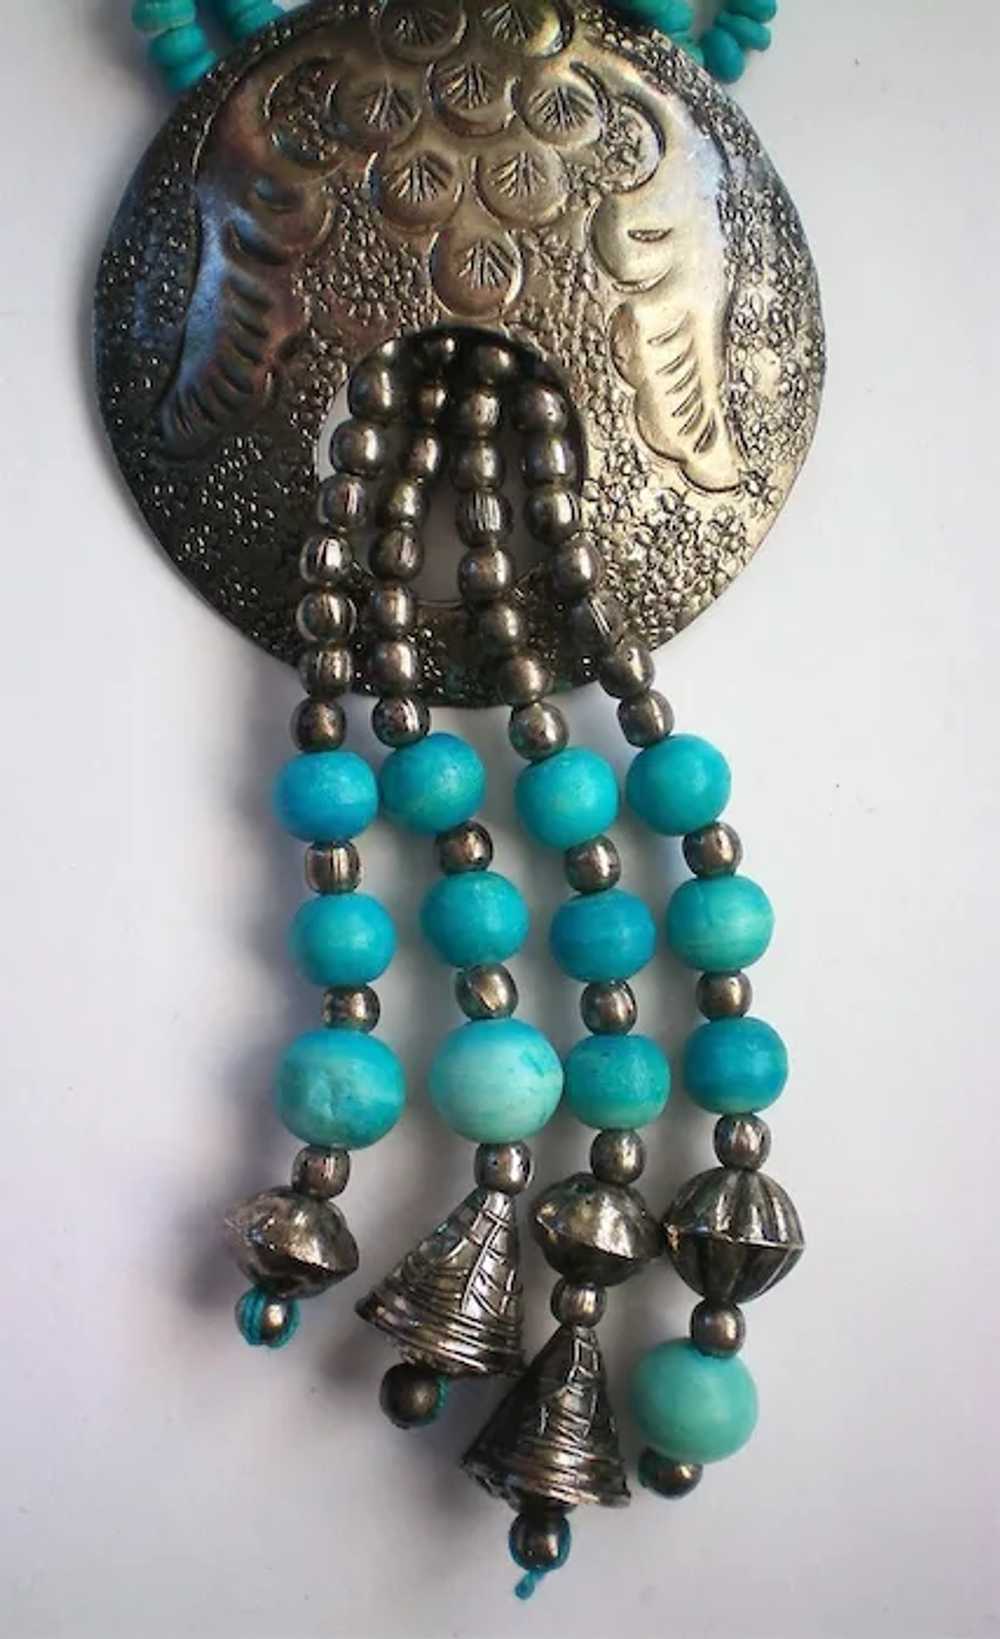 Fabulous Faux Turquoise Native American Necklace - image 2